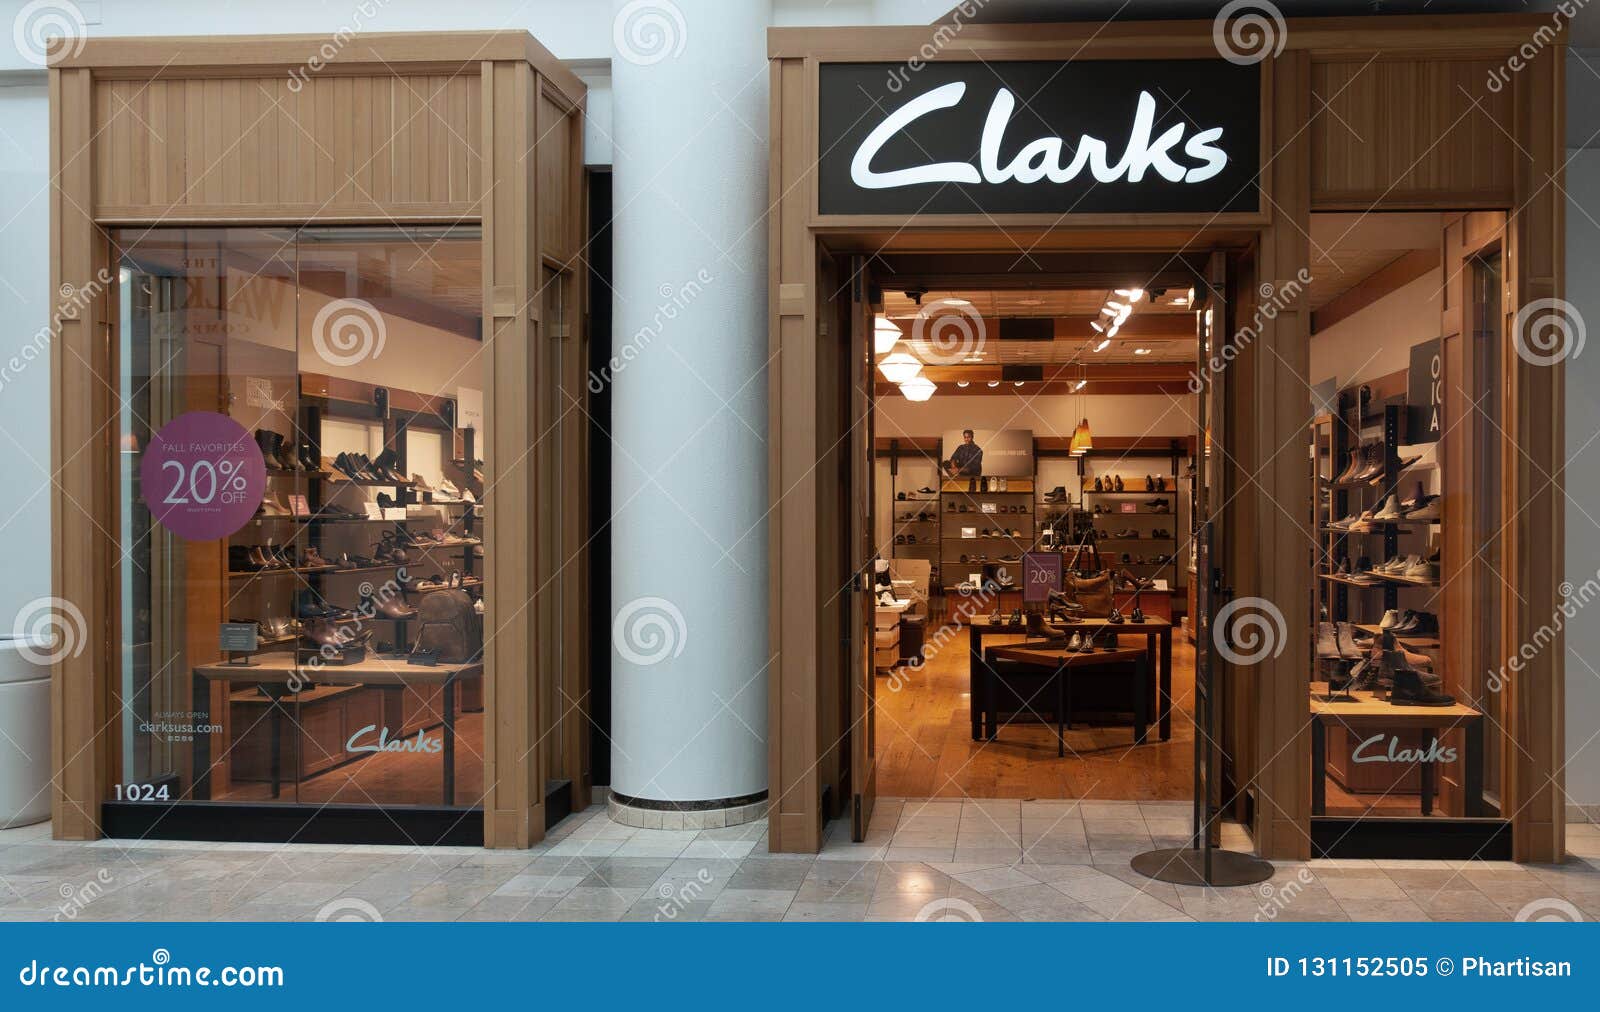 clarks shoes retailers usa